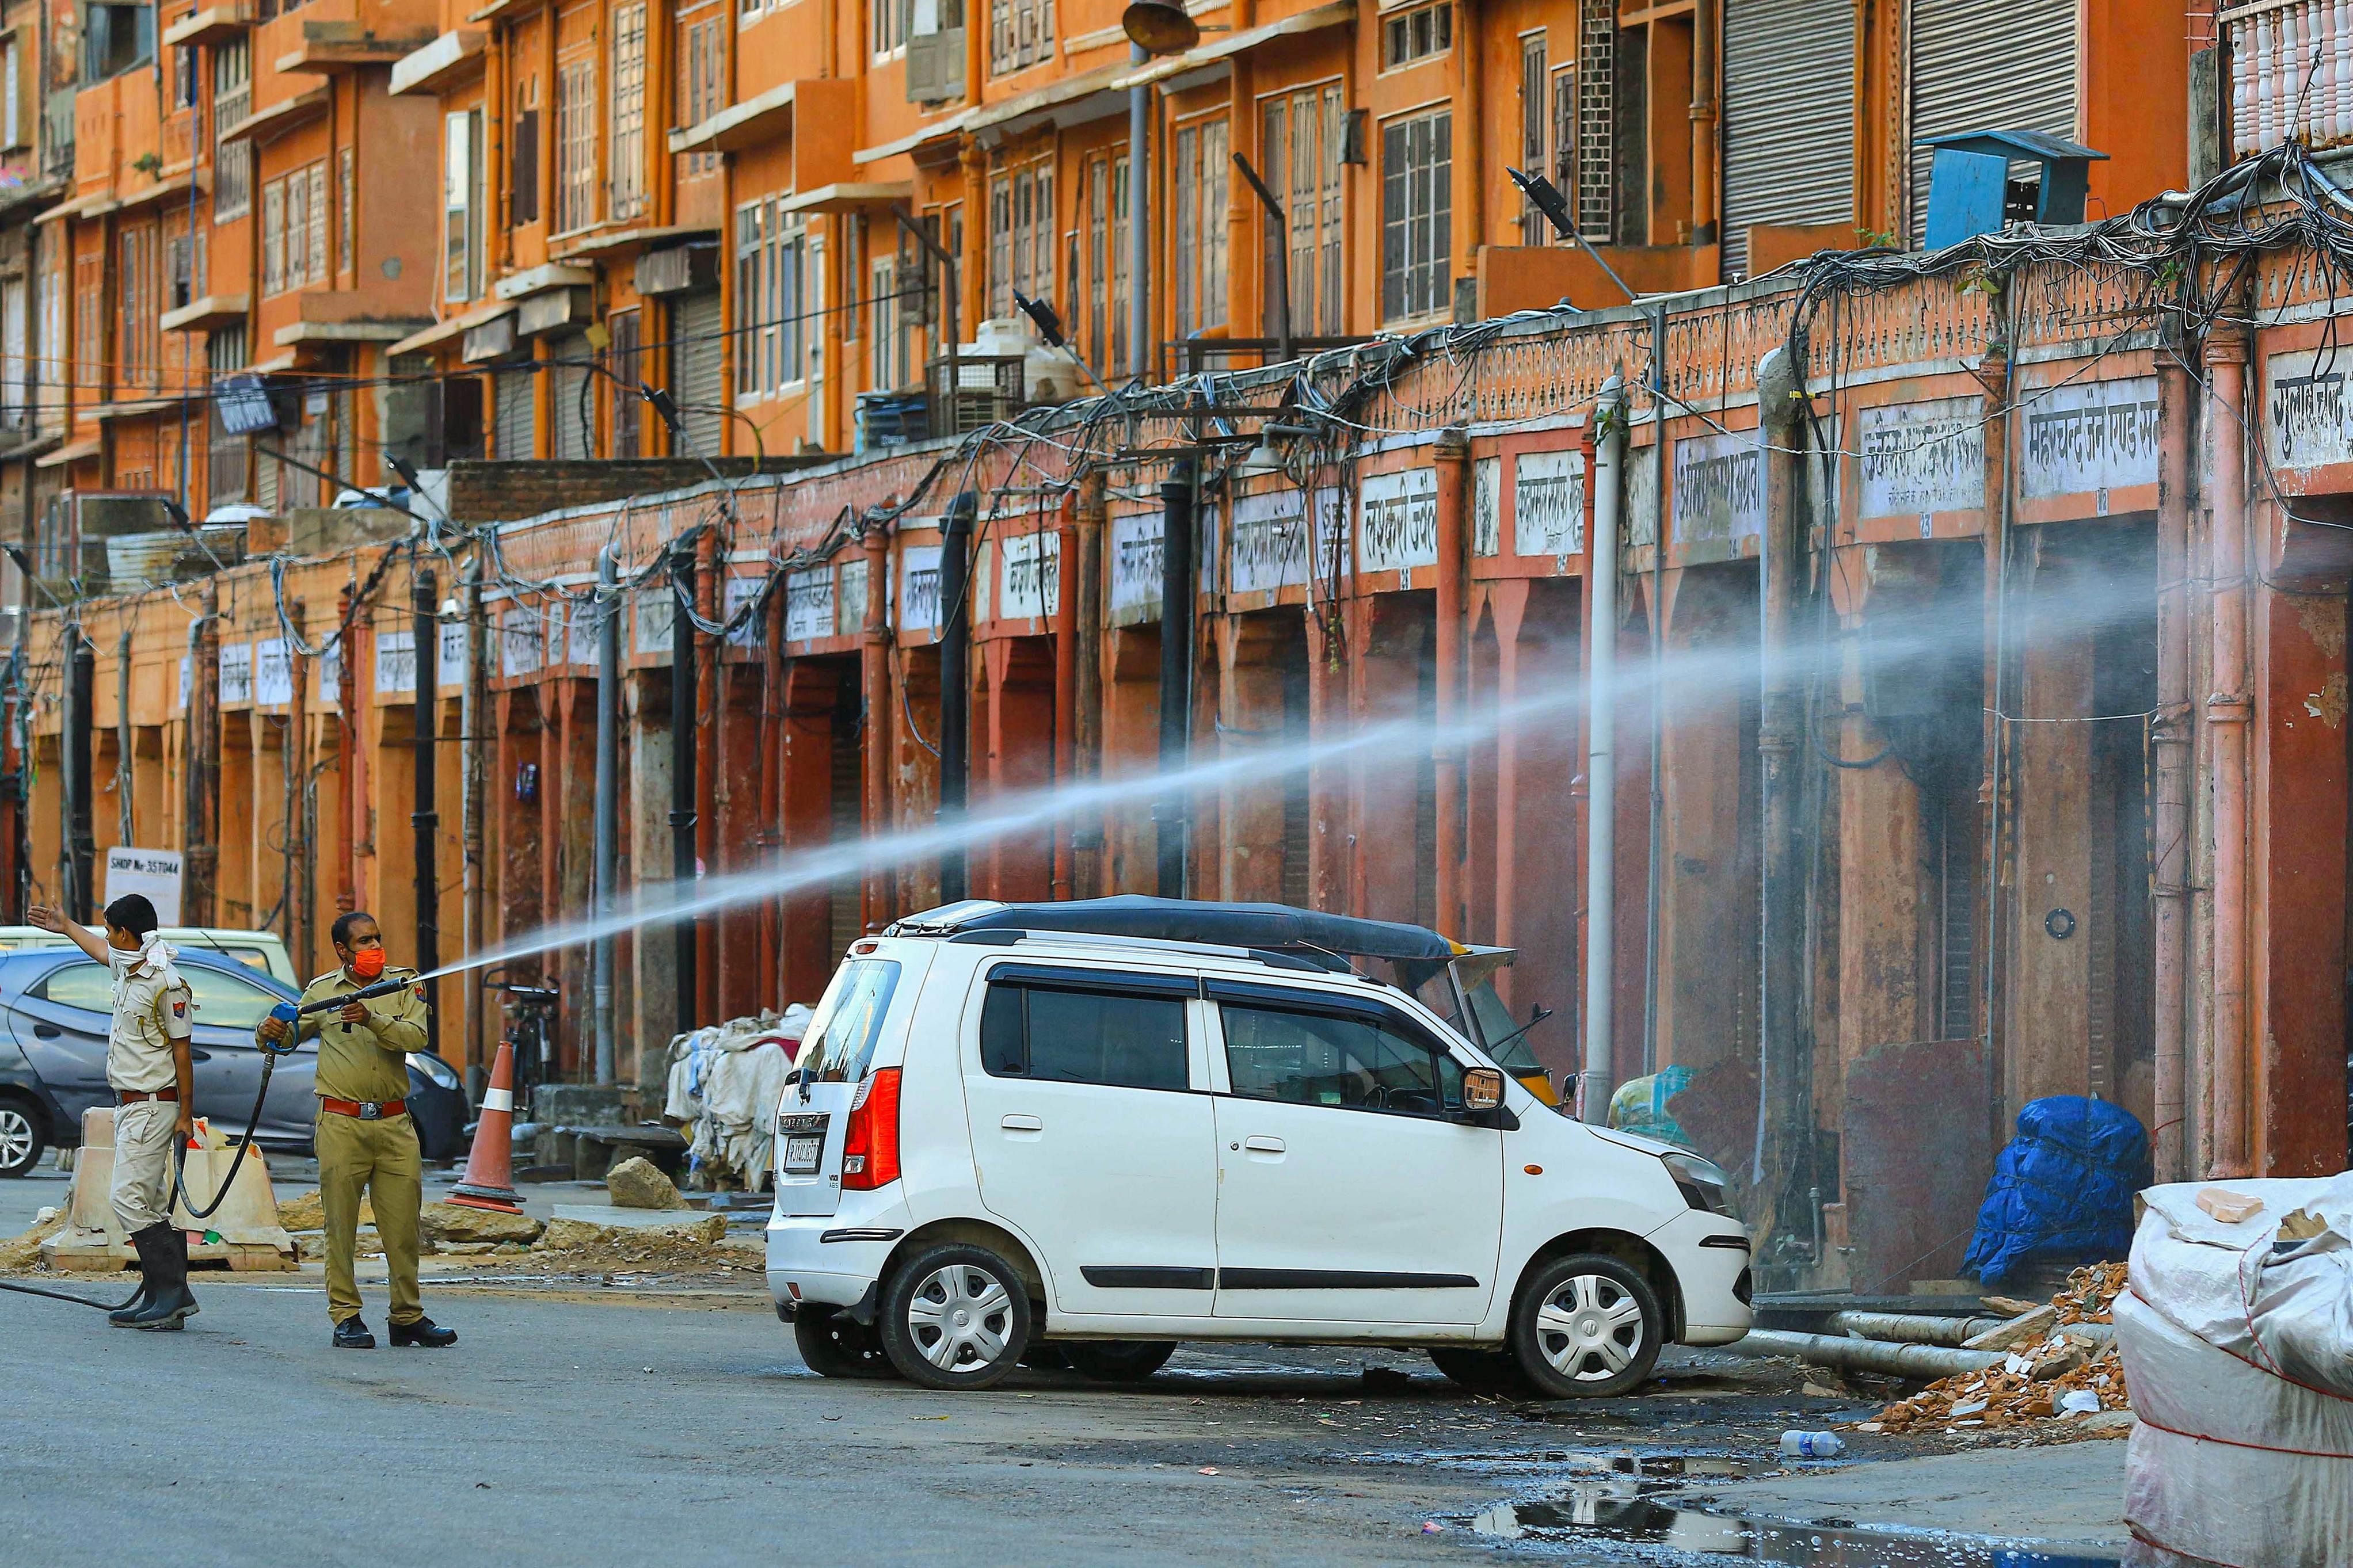 Jaipur: Fire station officials spray disinfectants amid concerns over the spread of the COVID-19 disease. (Credit: PTI)